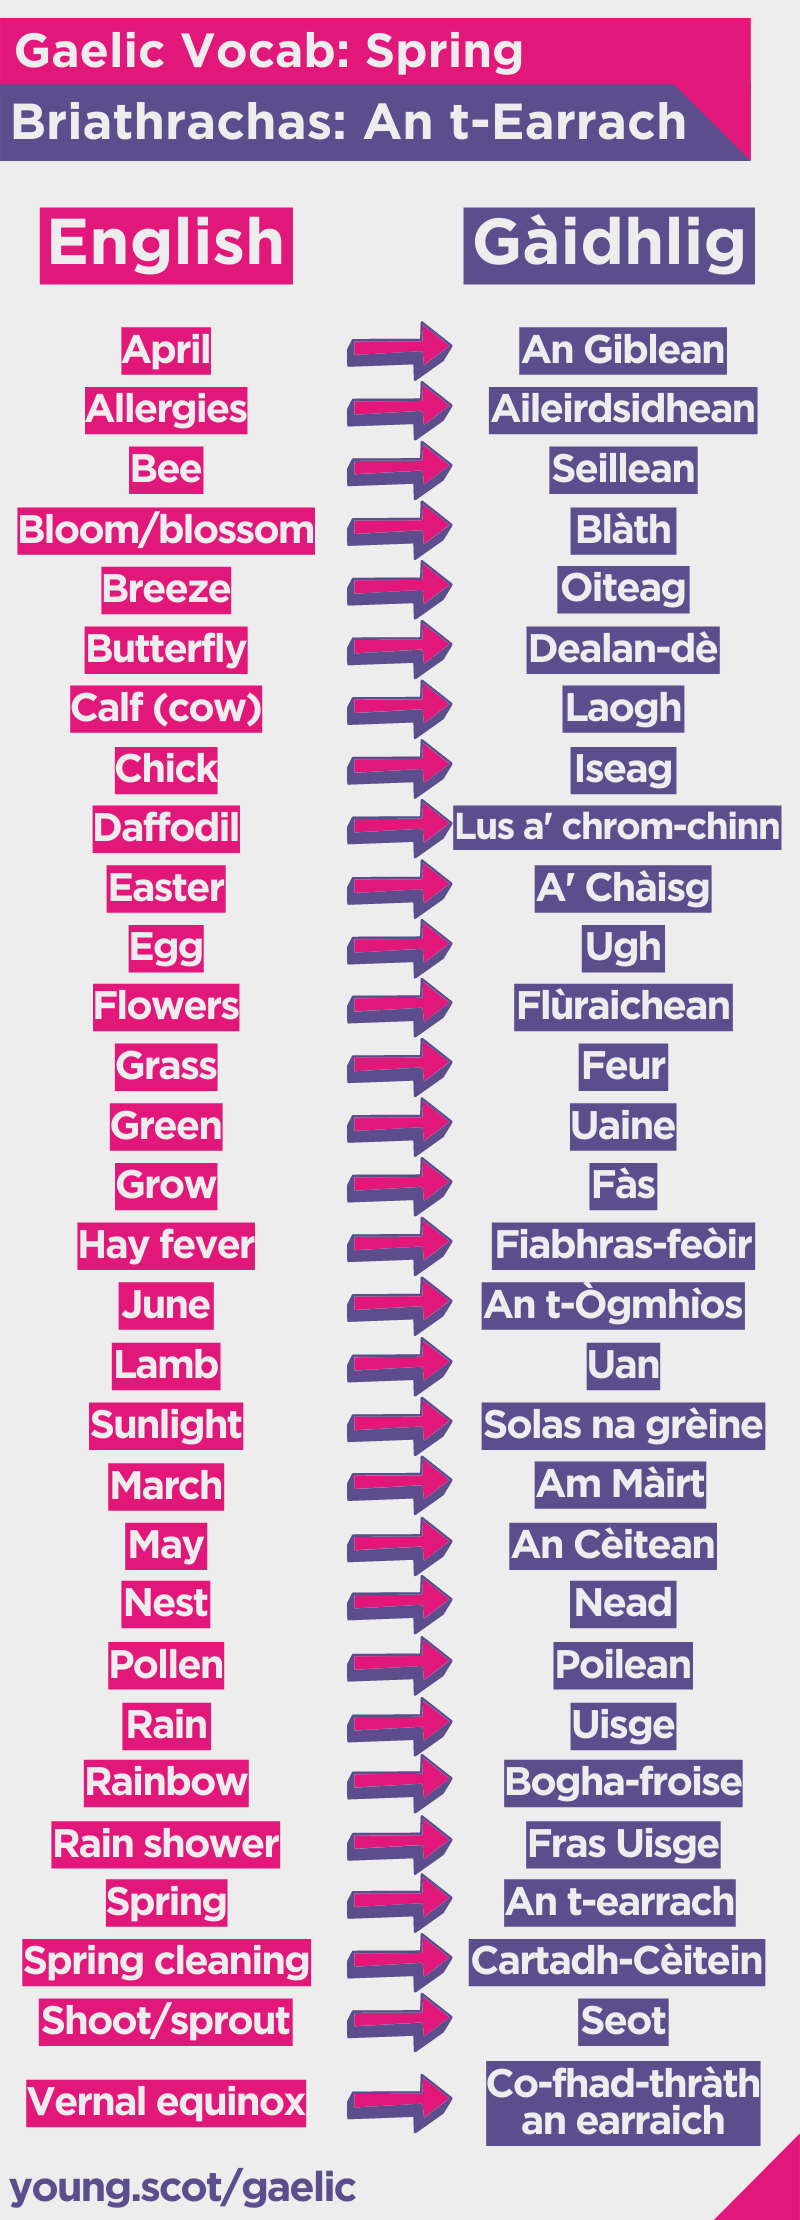 List of Gaelic spring words with English on the left and Gaelic translations on the right. A text version is available below for screen-readers.